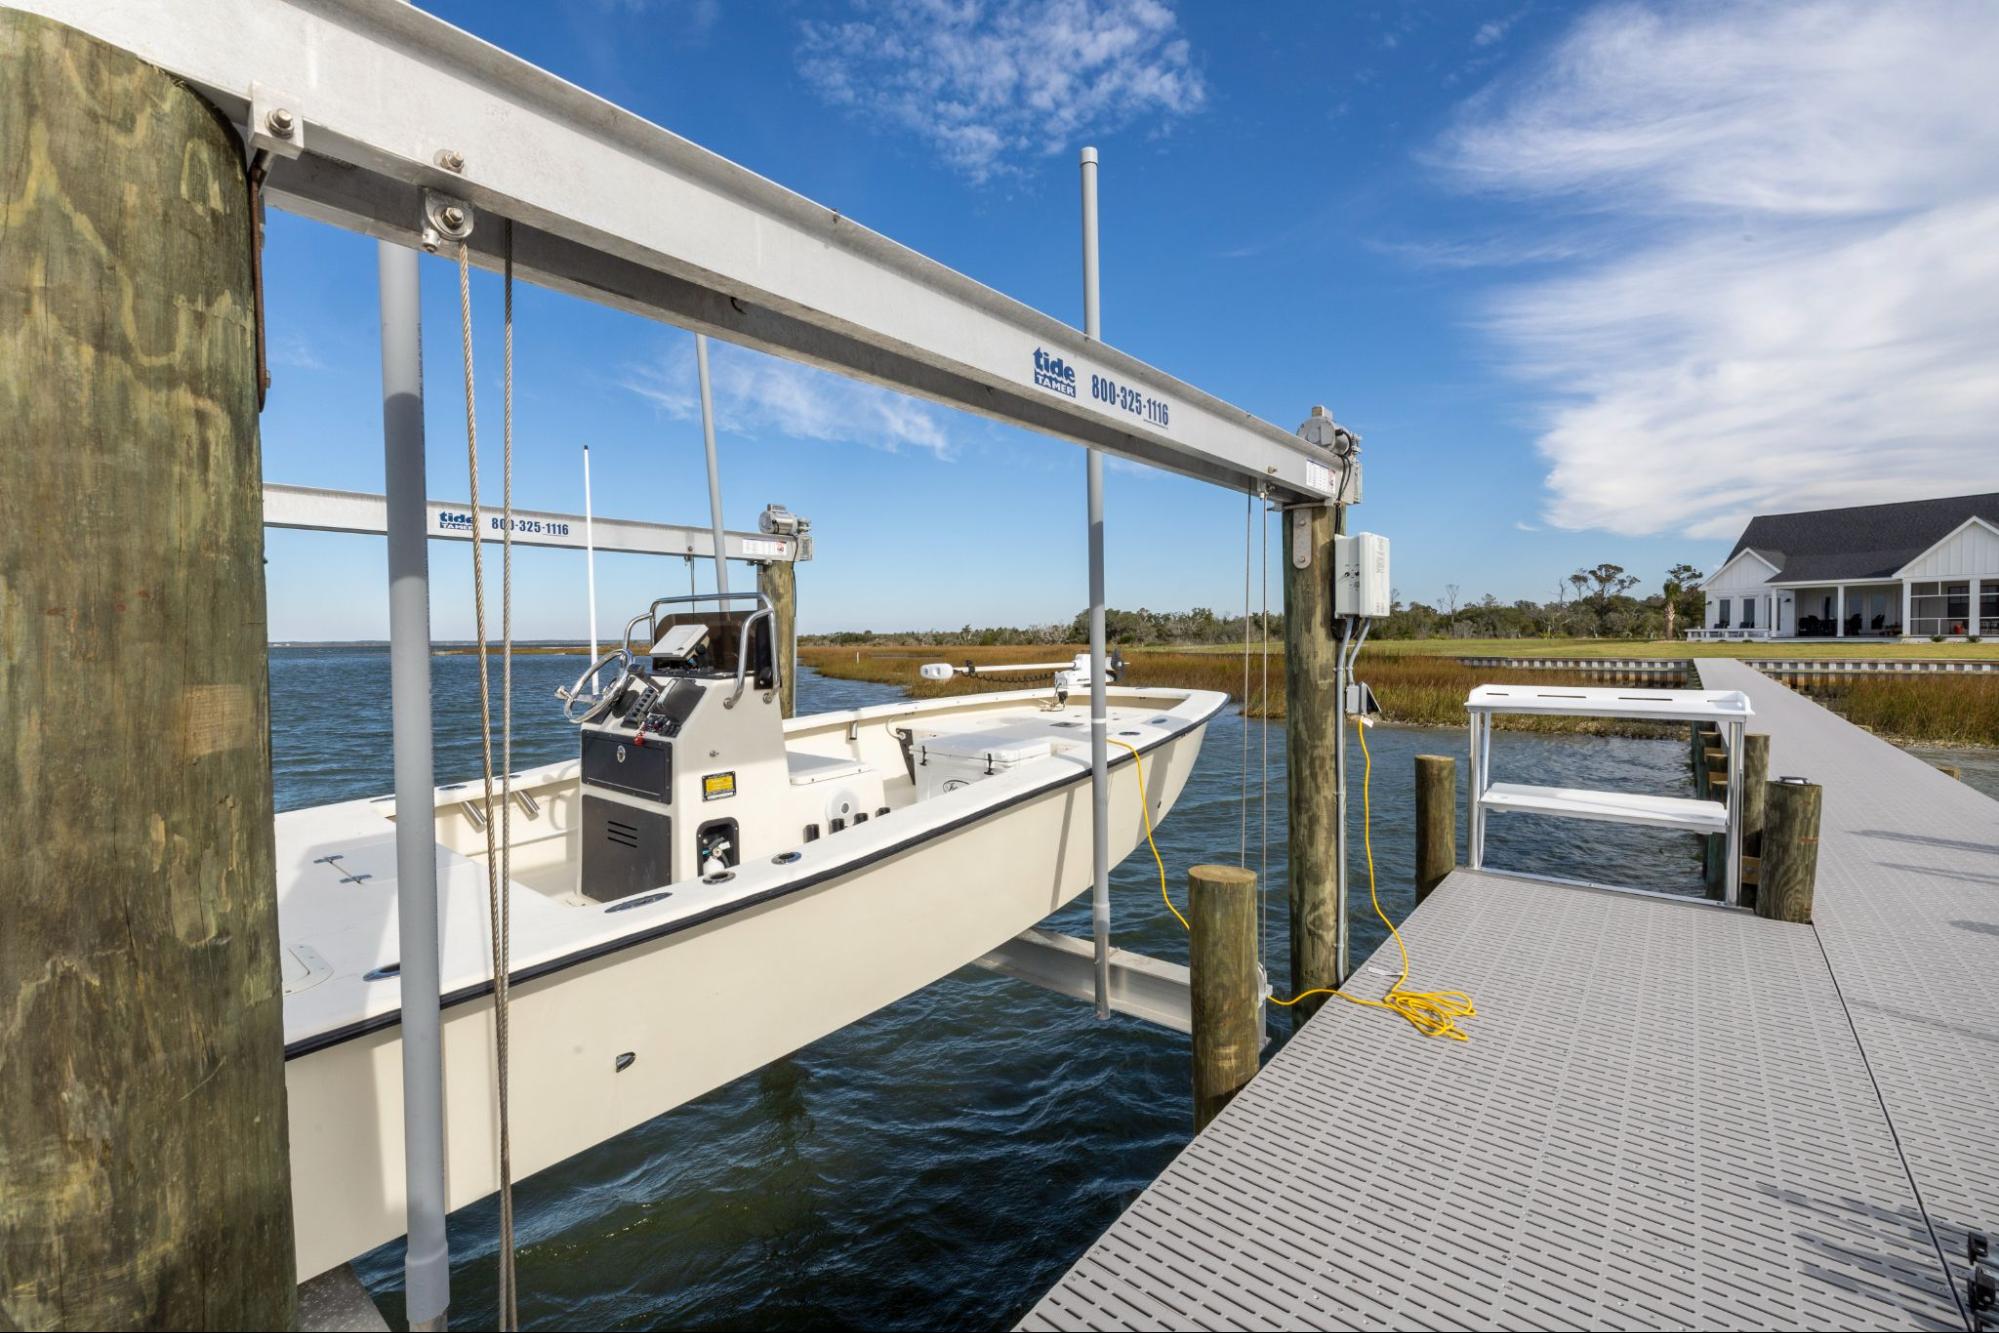 A white boat next to a marine dock on a lake with Titan Deck marine decking.